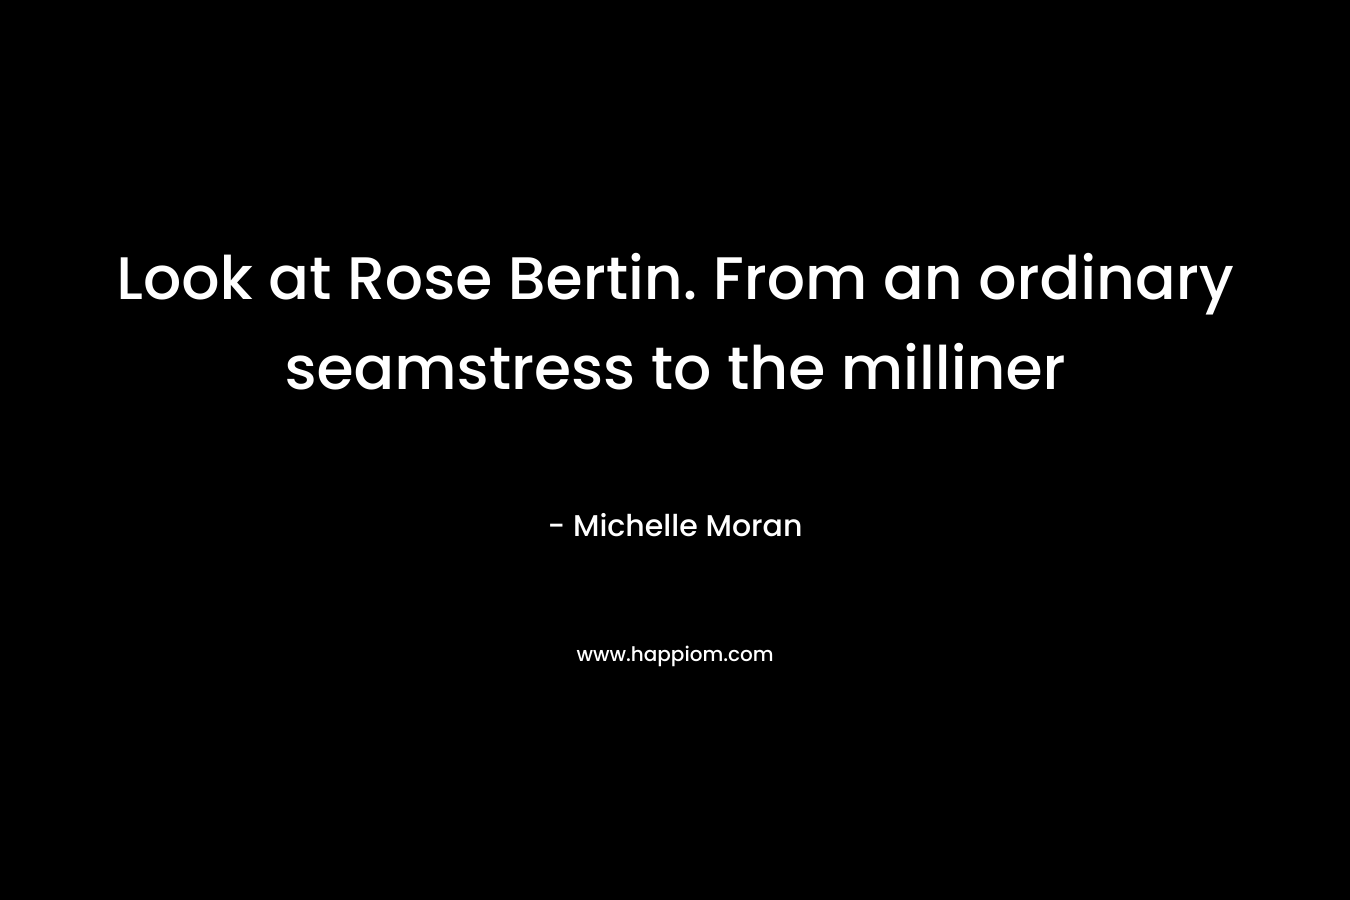 Look at Rose Bertin. From an ordinary seamstress to the milliner – Michelle Moran